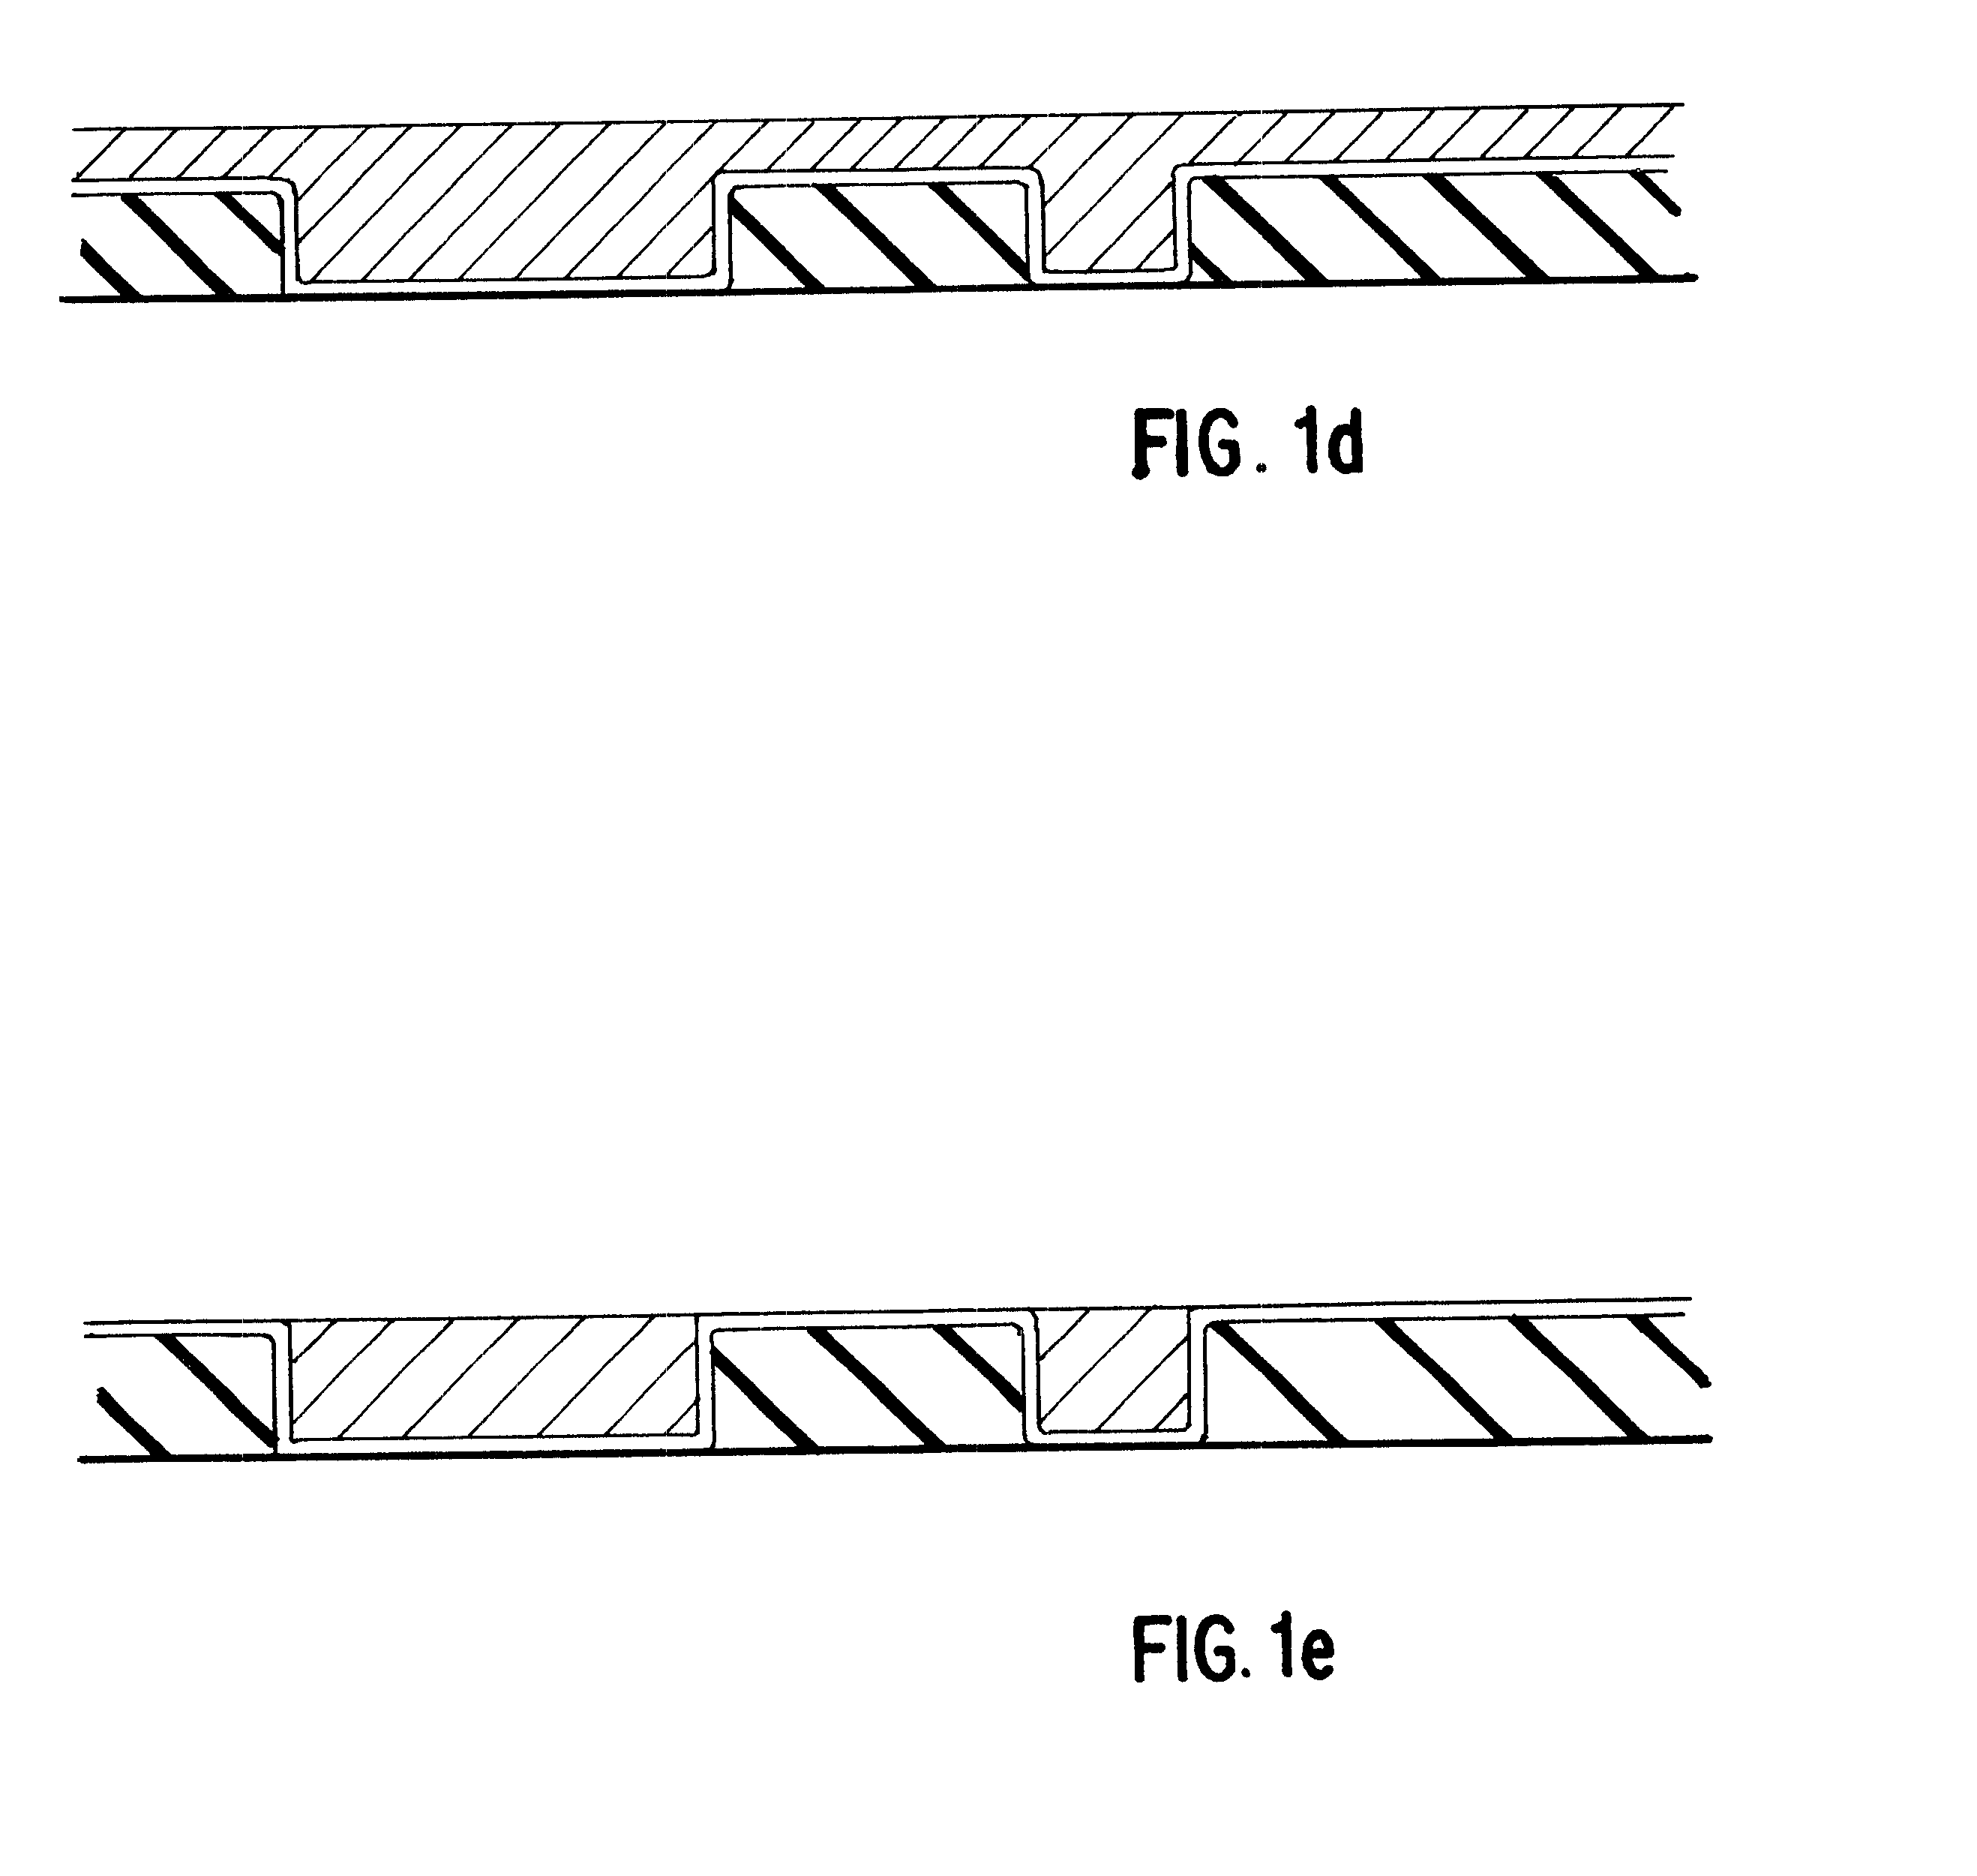 Anode assembly for plating and planarizing a conductive layer